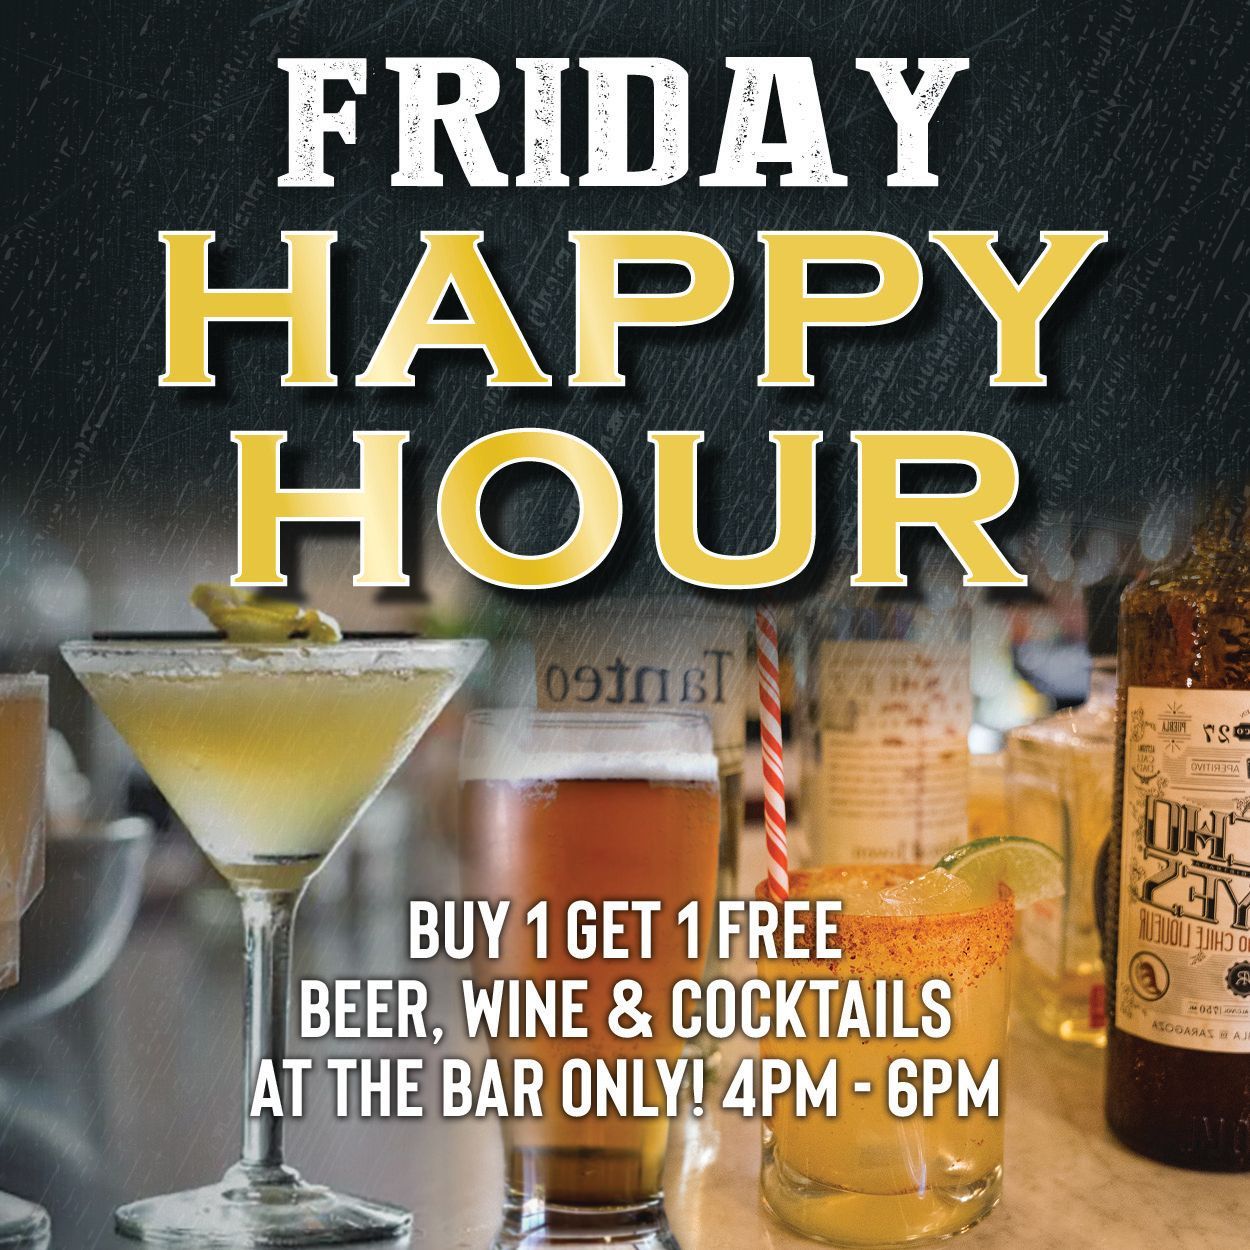 an advertisement for a friday happy hour that says buy 1 get 1 free beer wine and cocktails